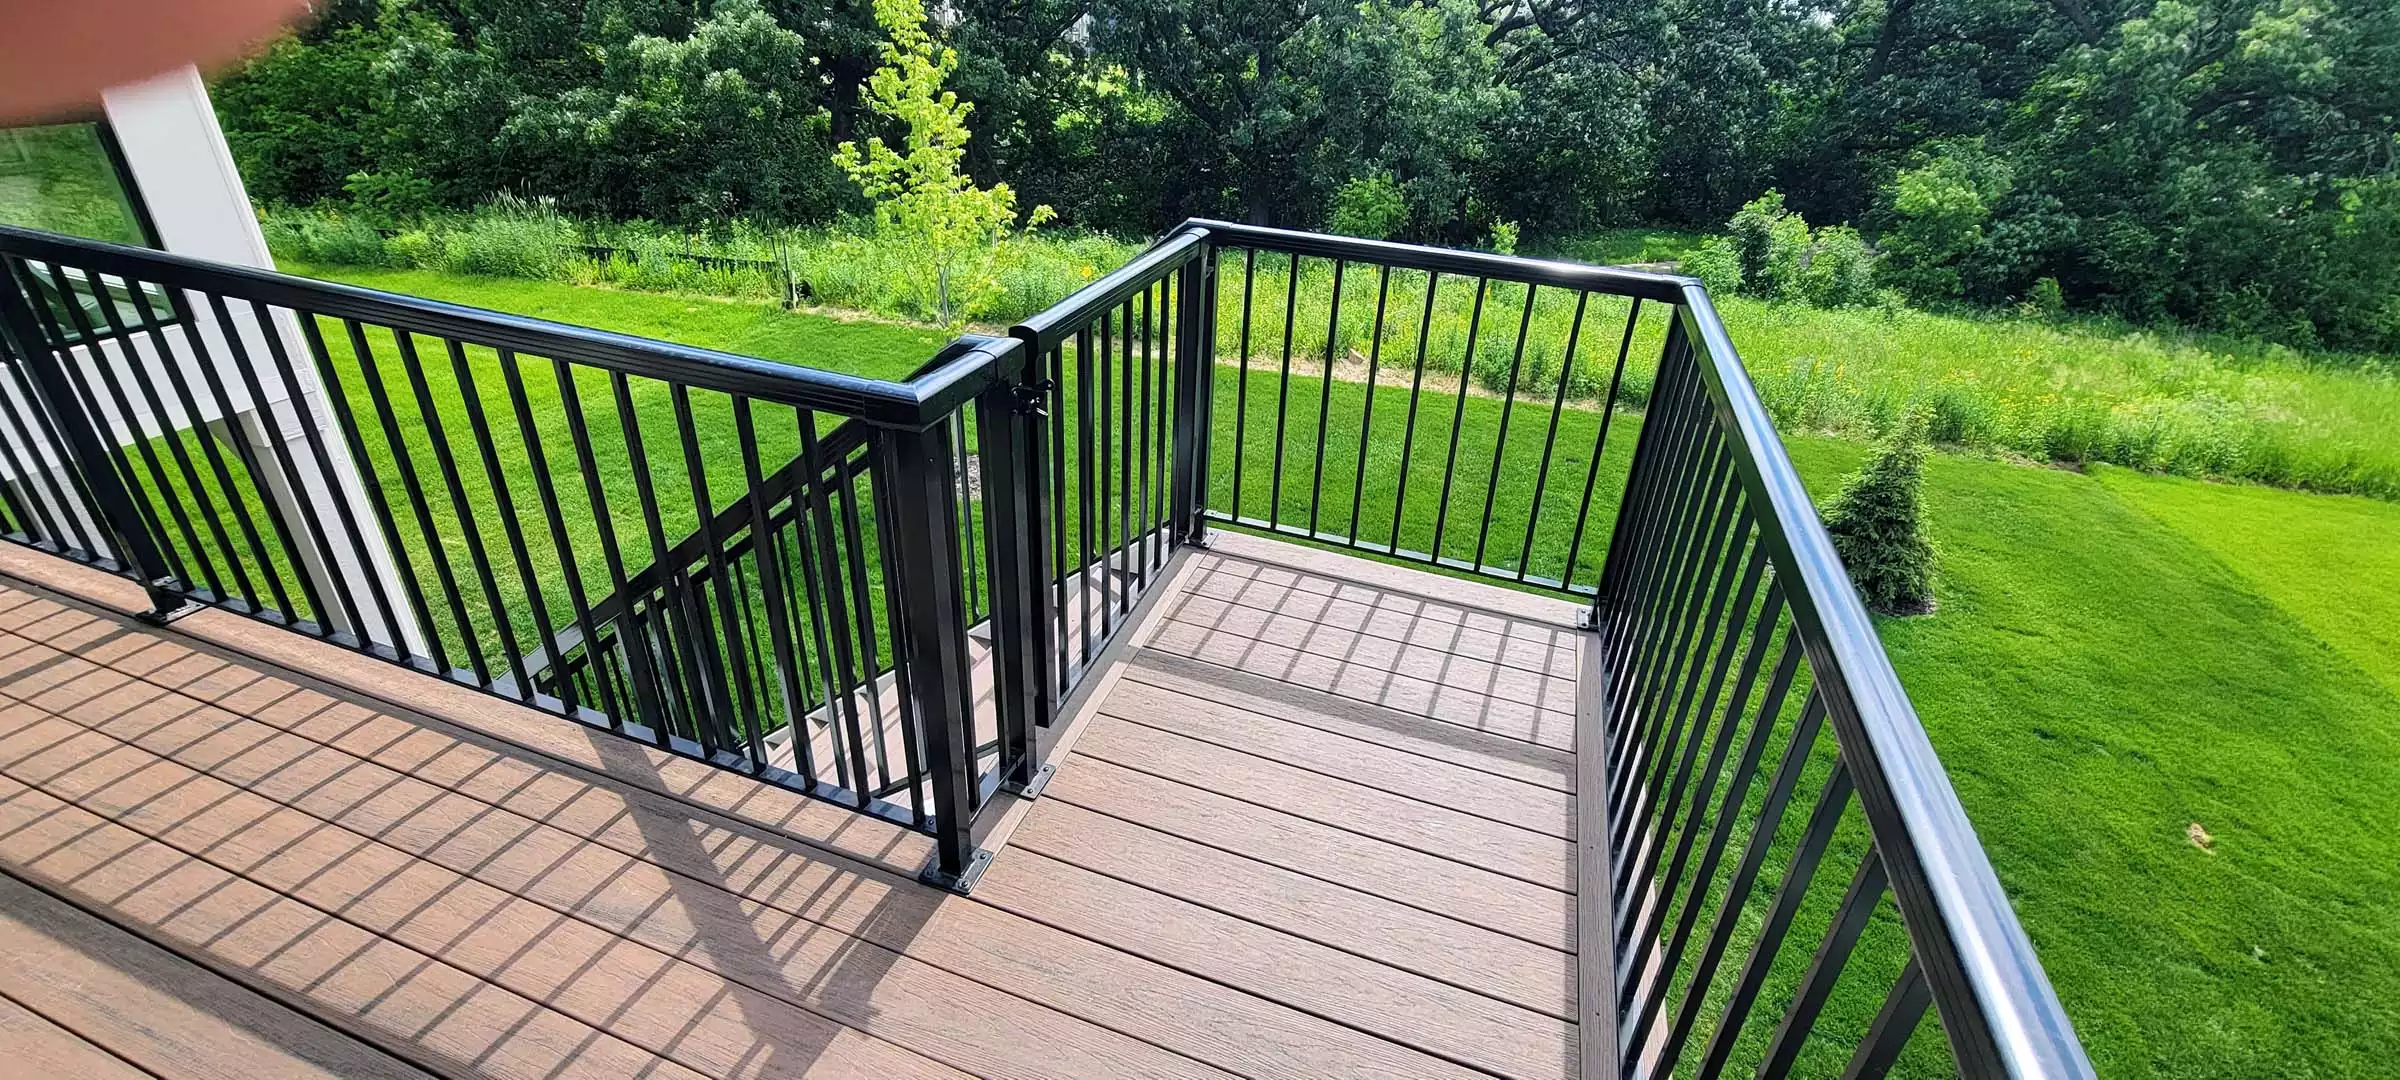 TImbertech picture frame decking